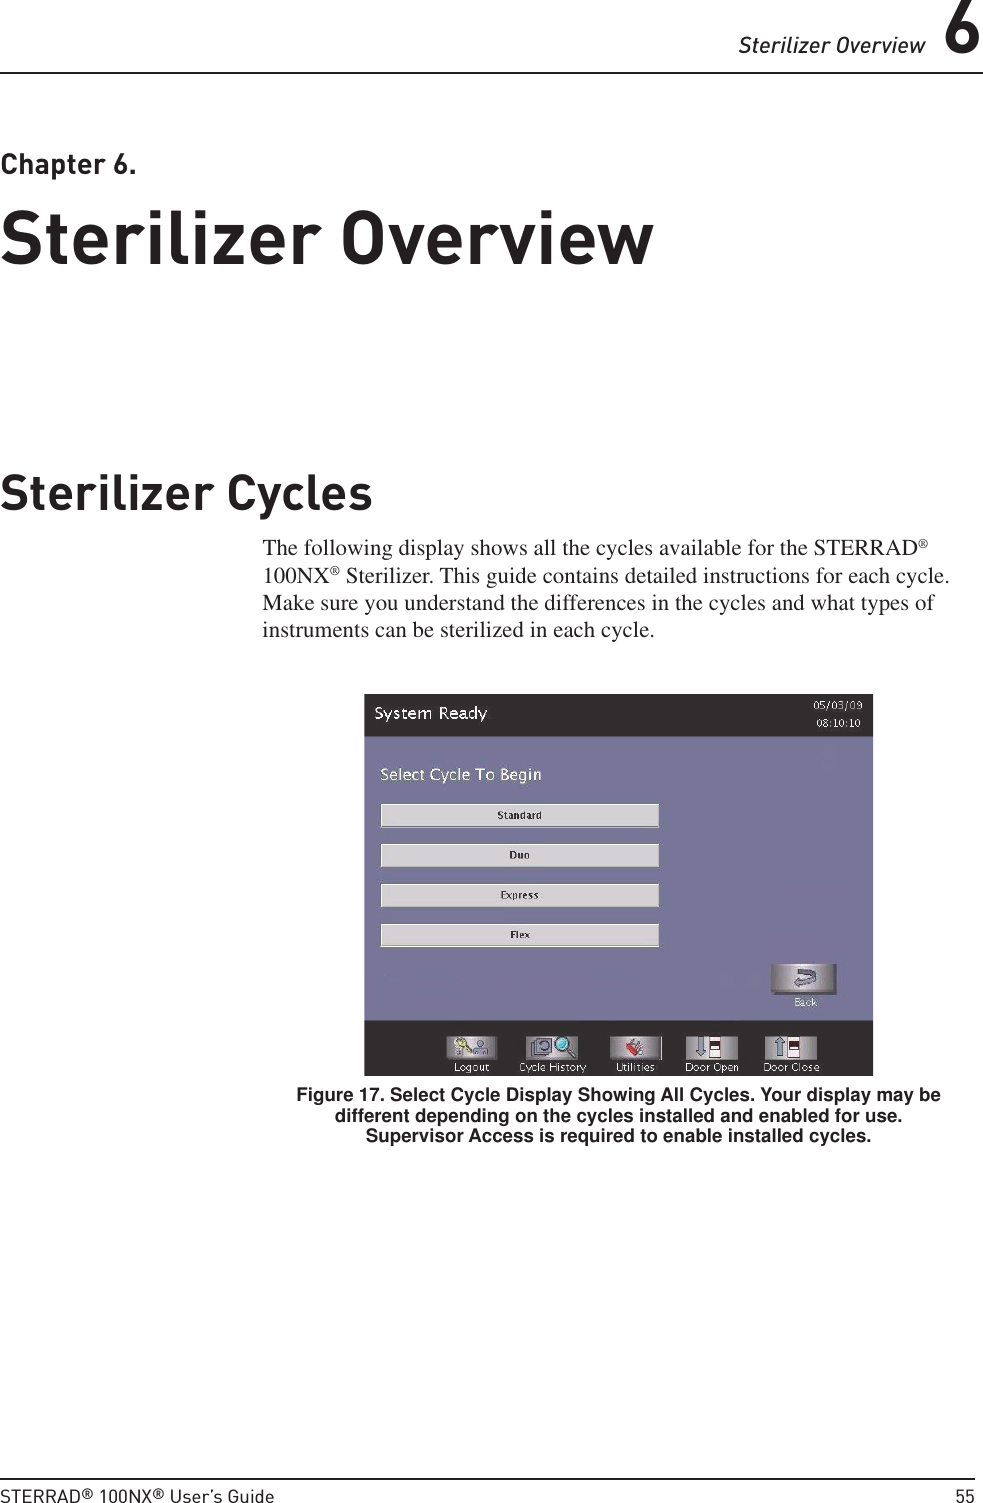 Sterilizer Overview 6STERRAD® 100NX® User’s Guide  55Chapter 6. Sterilizer OverviewSterilizer OverviewSterilizer CyclesThe following display shows all the cycles available for the STERRAD® 100NX® Sterilizer. This guide contains detailed instructions for each cycle. Make sure you understand the differences in the cycles and what types of instruments can be sterilized in each cycle.Figure 17. Select Cycle Display Showing All Cycles. Your display may be different depending on the cycles installed and enabled for use. Supervisor Access is required to enable installed cycles.